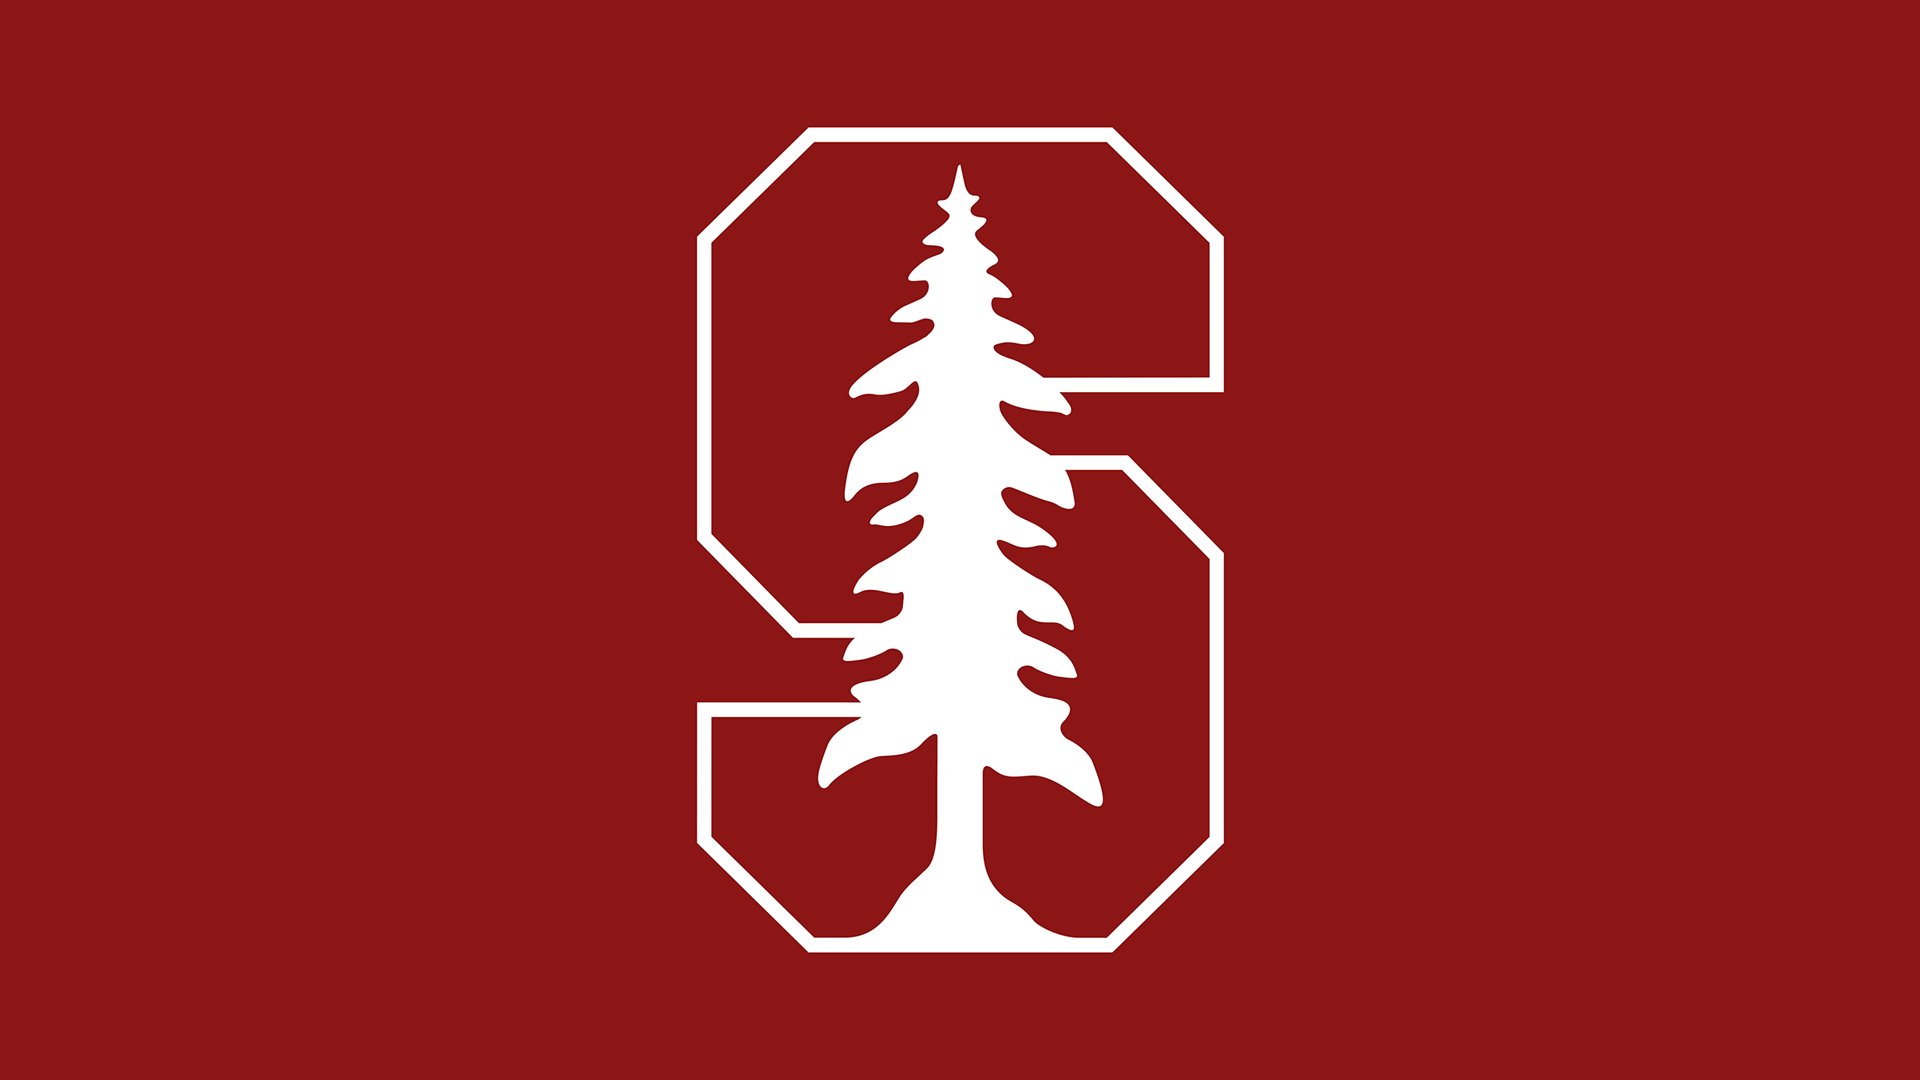 🔥 Download Stanford Cardinal Football HD Wallpaper Background Image by